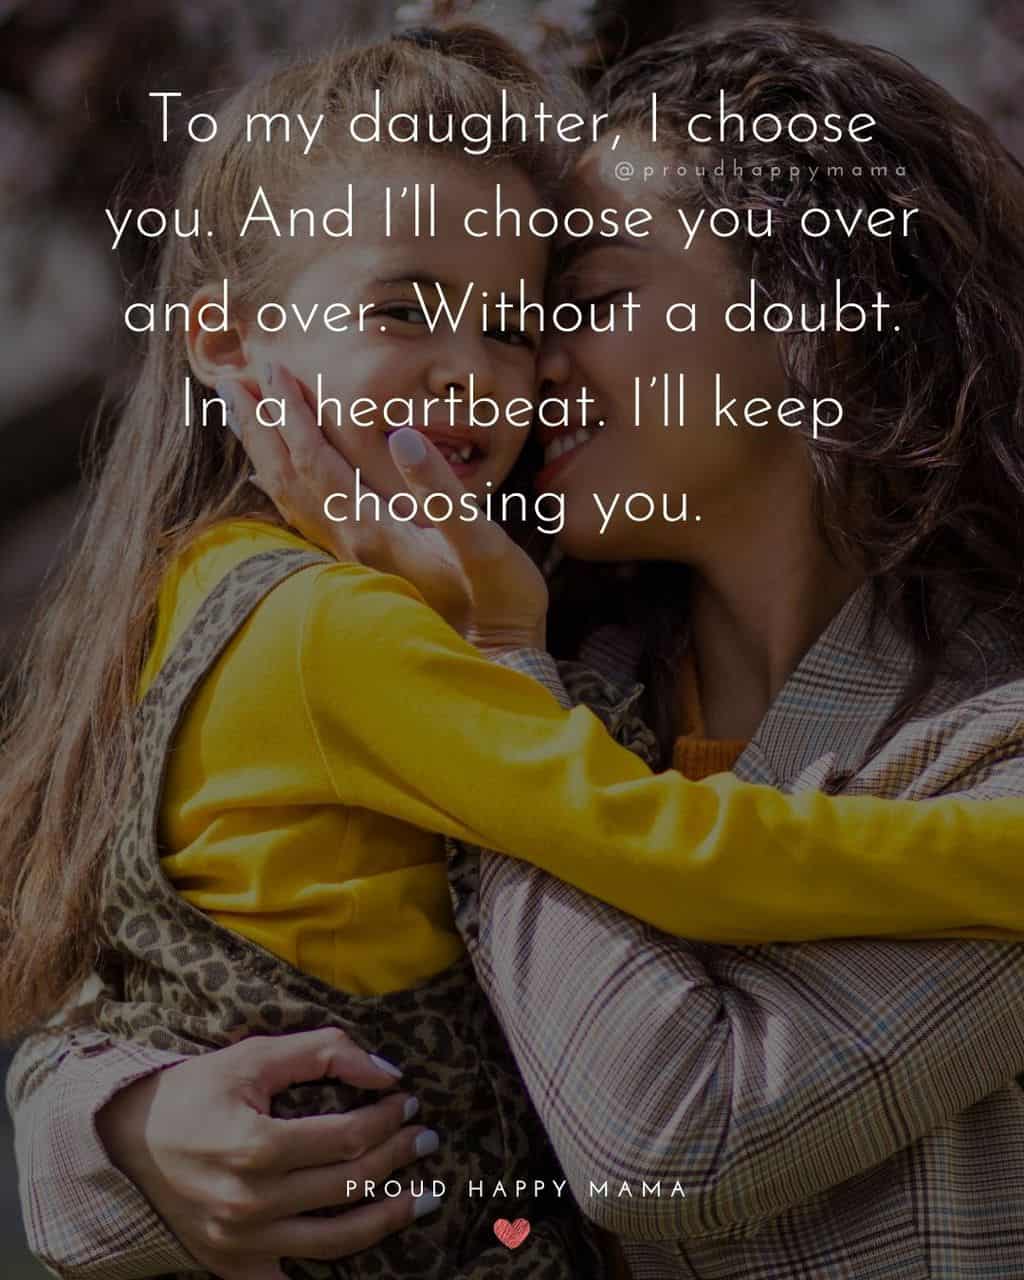 quotes for daughter love - ‘To my daughter, I choose you. And I’ll choose you over and over. Without a doubt. In a heartbeat. I’ll keep choosing you.’